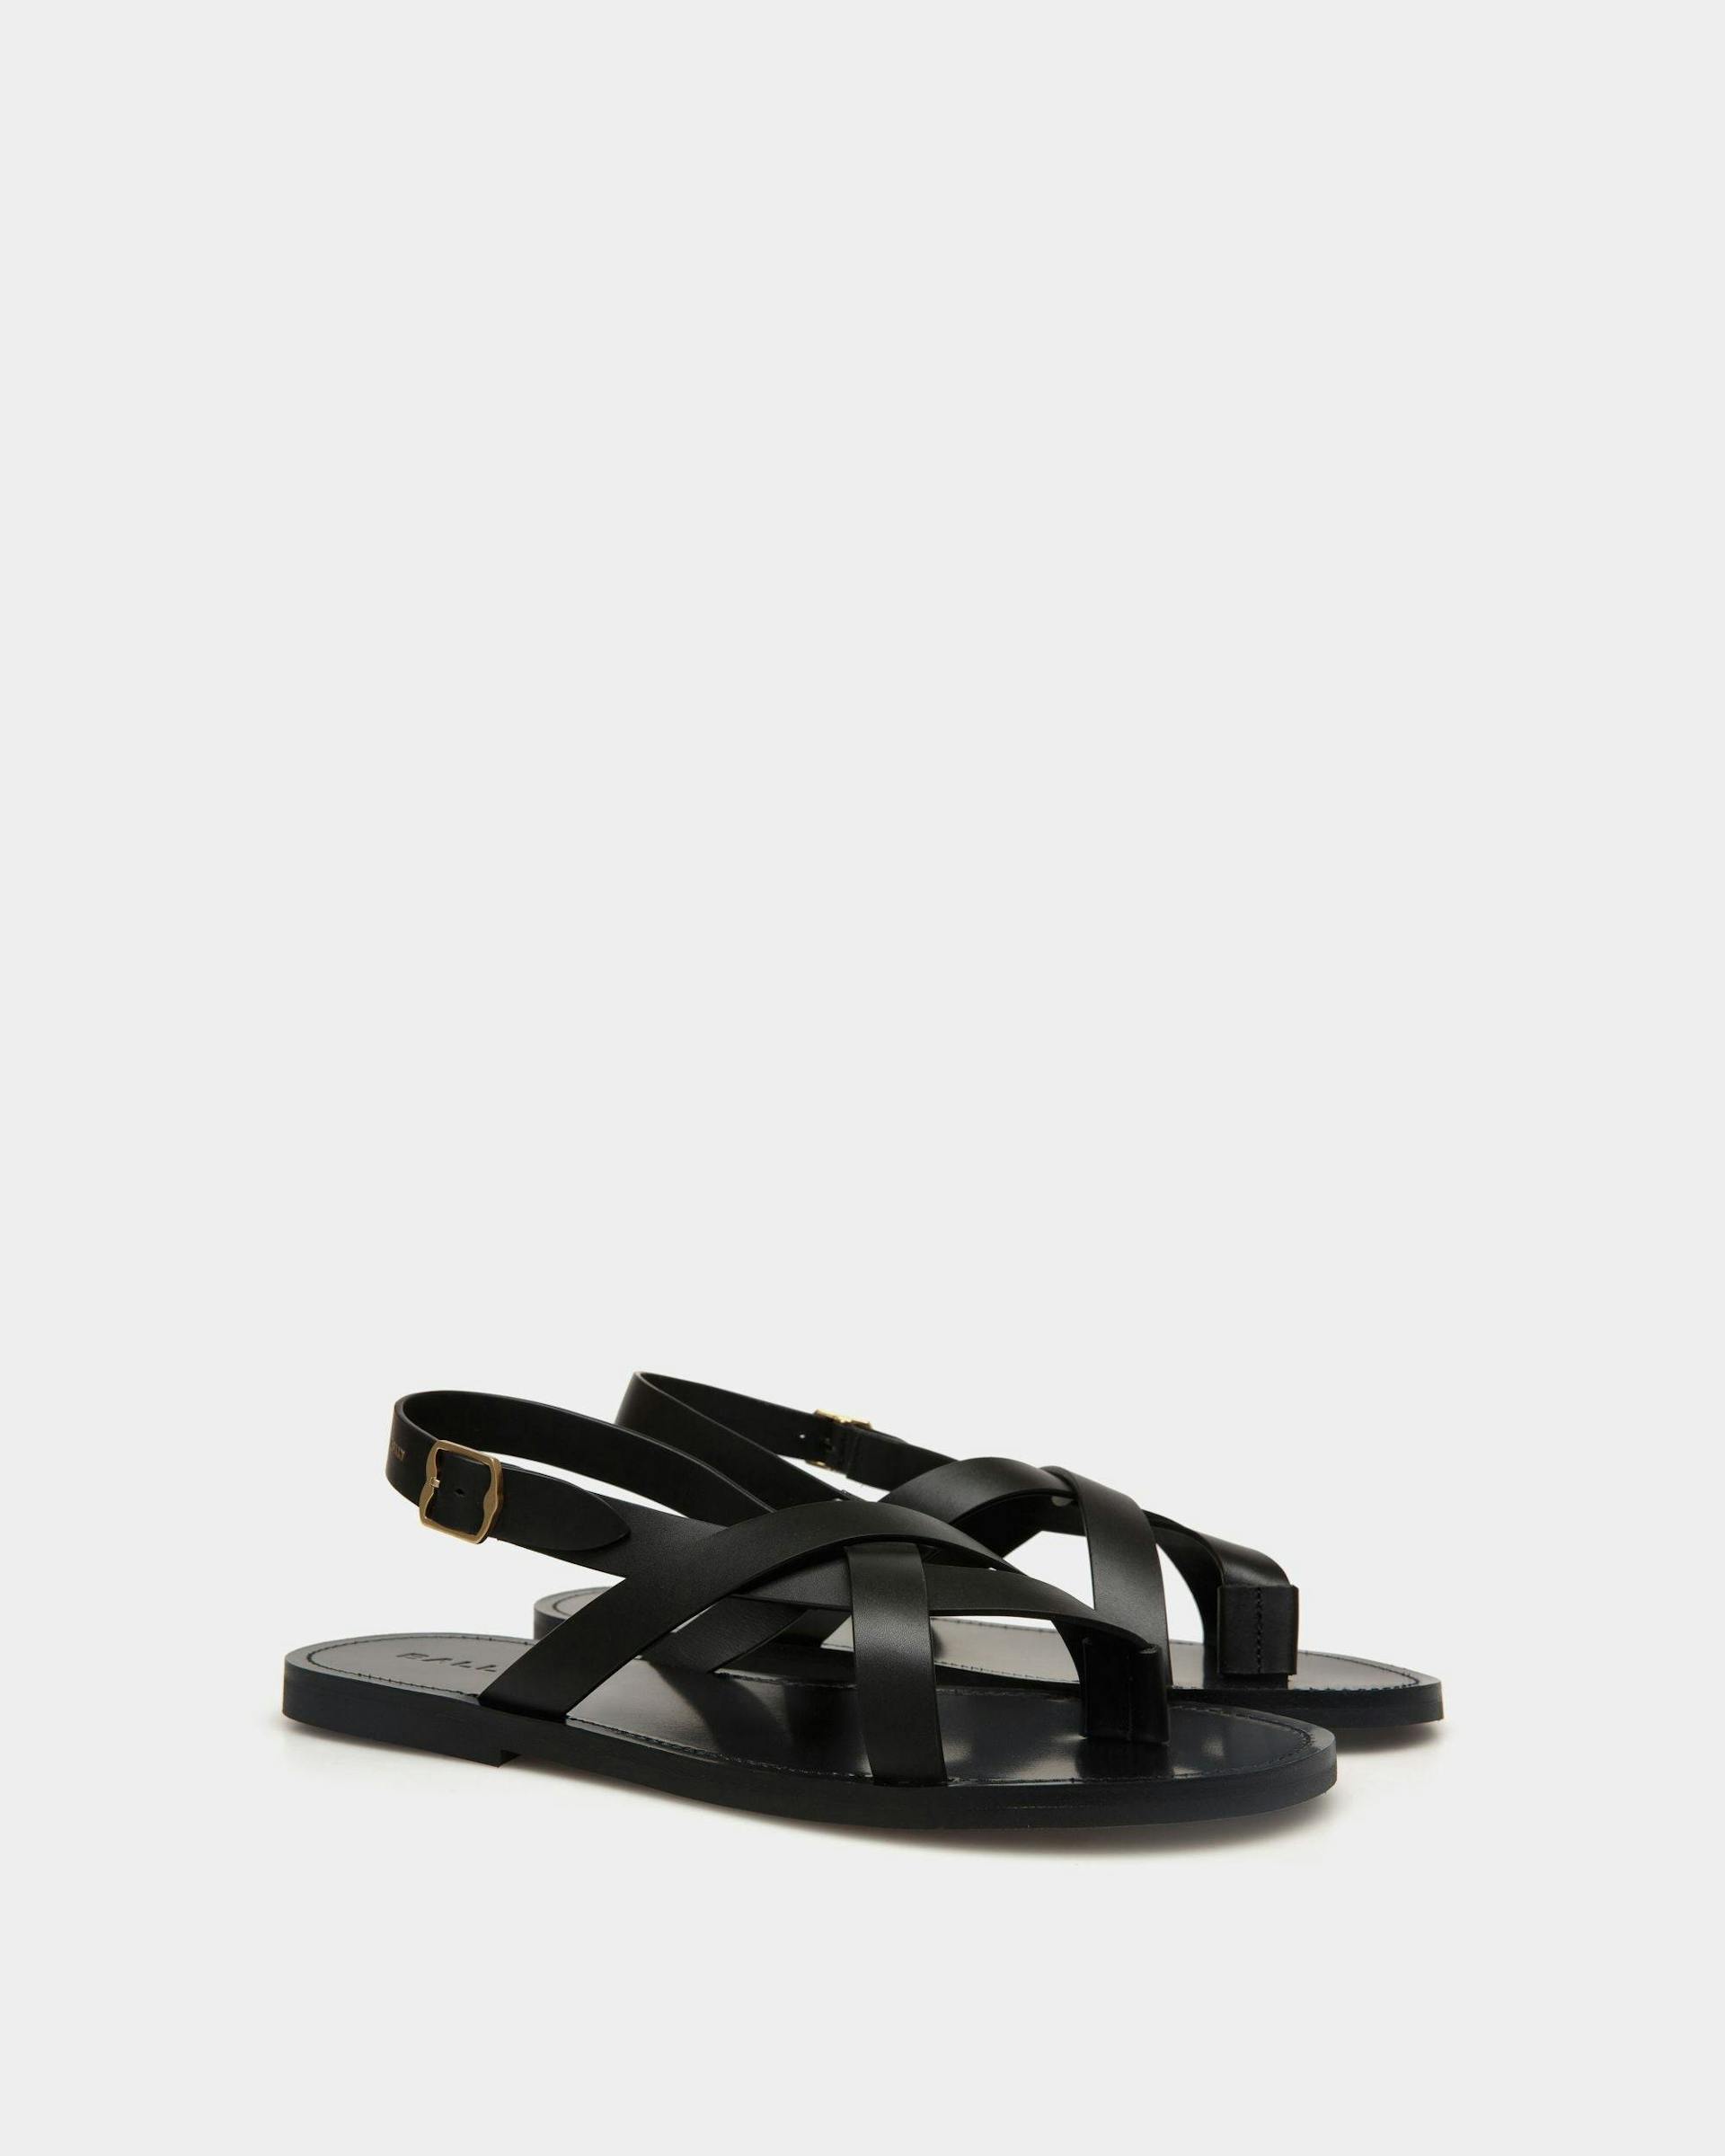 Men's Chateau Sandal in Leather | Bally | Still Life 3/4 Front